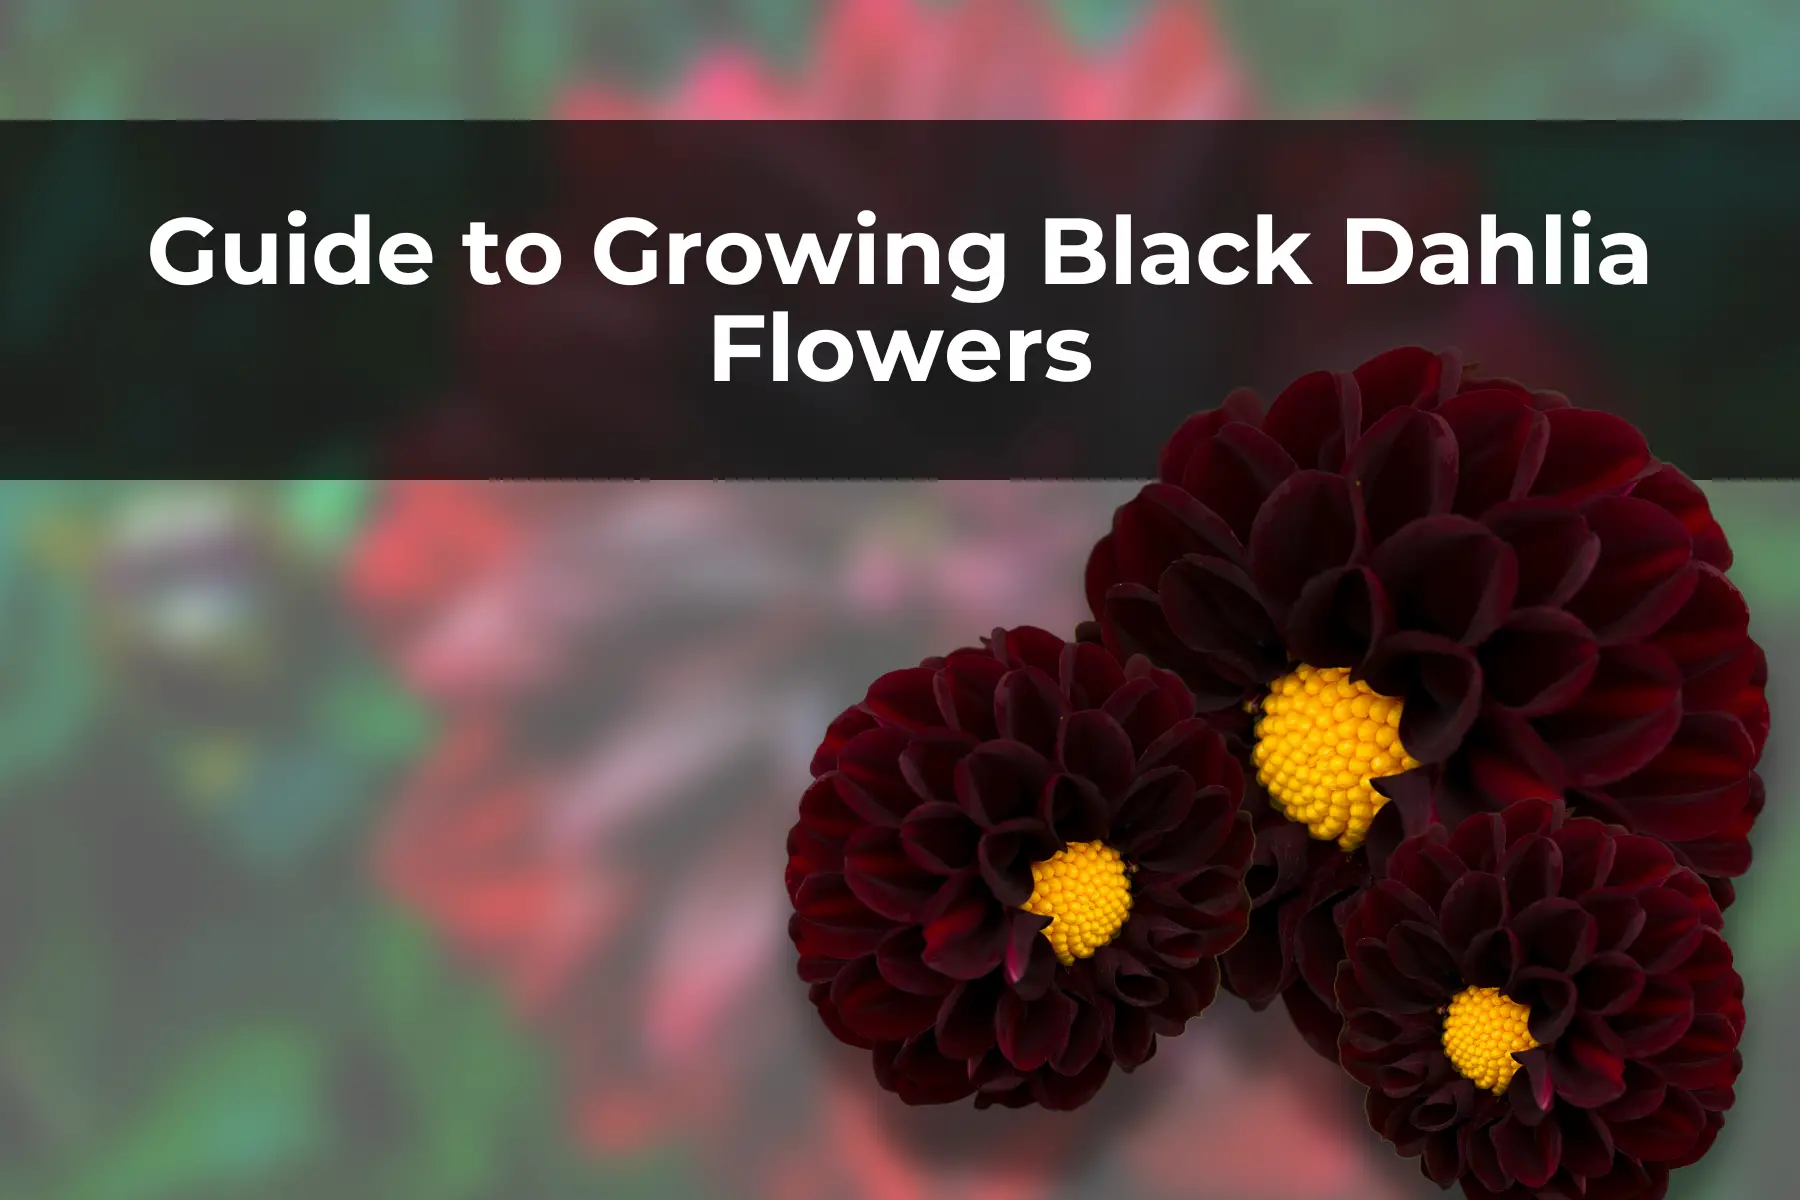 Guide to Growing Black Dahlia Flowers